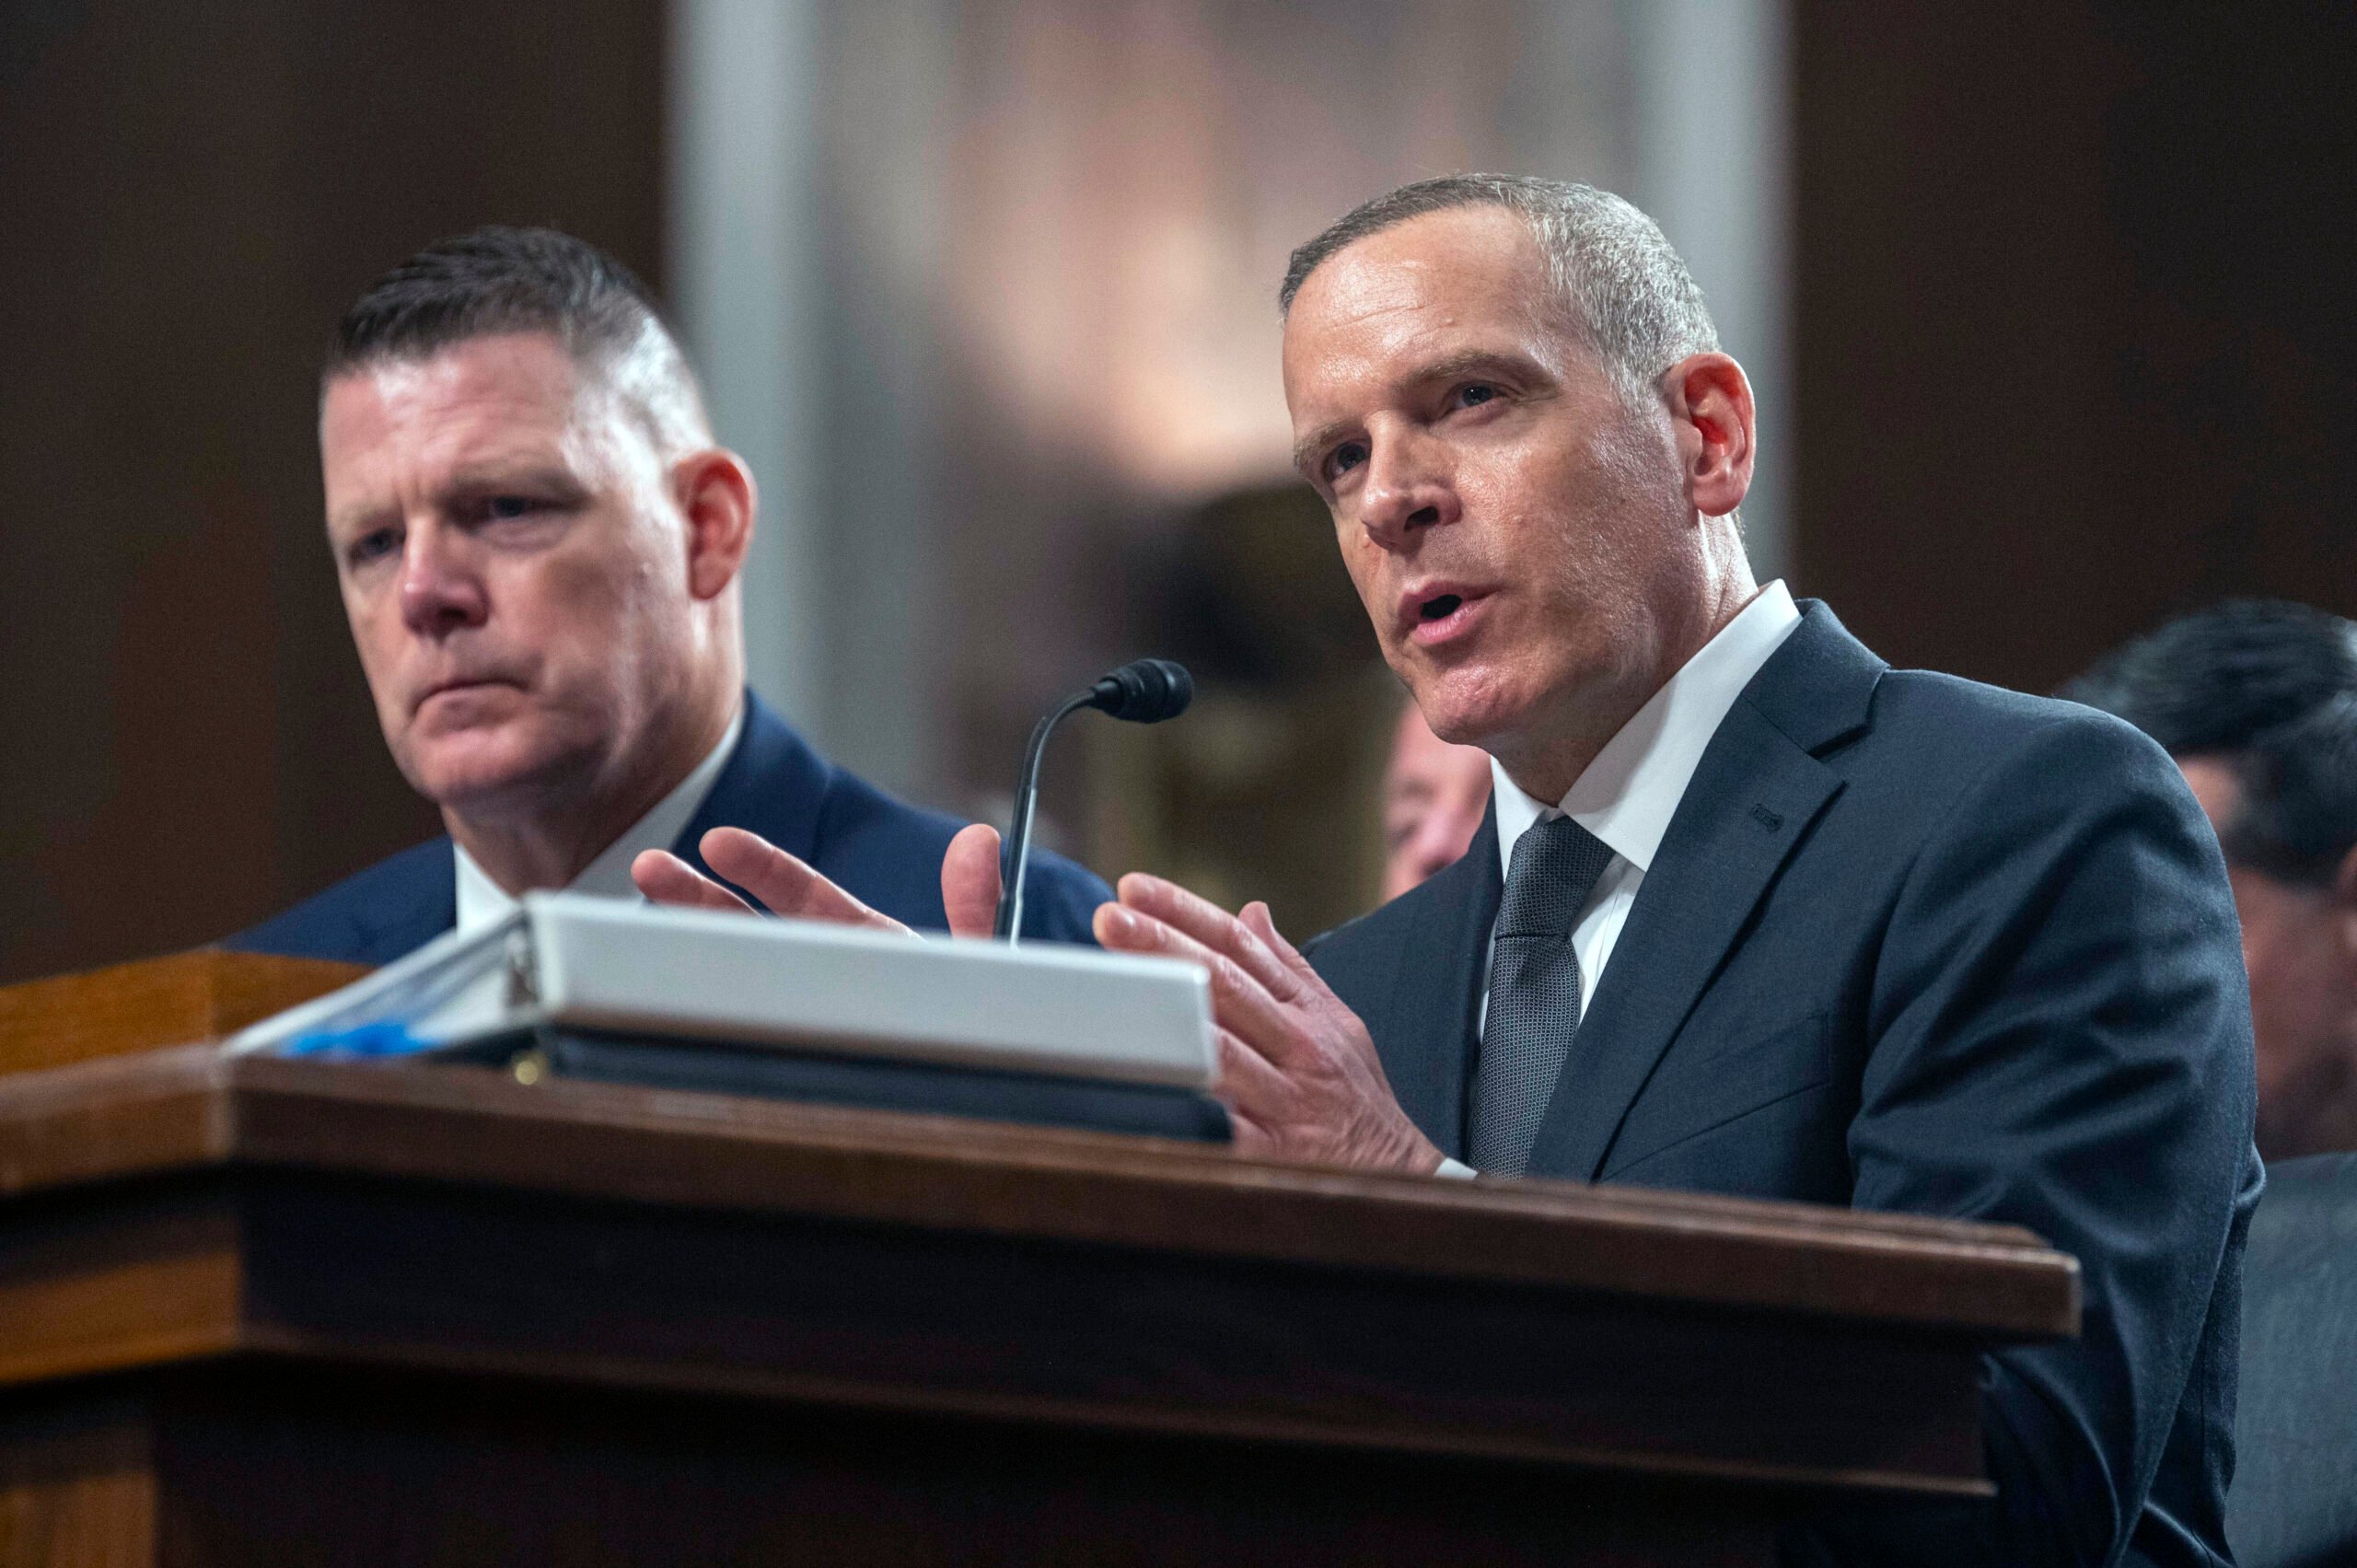 U.S. Secret Service Acting Director Ronald Rowe, left, and FBI Deputy Director Paul Abbate, right, testify before a Joint Senate Committee on Homeland Security and Governmental Affairs and Senate Committee on the Judiciary hearing examining the security failure